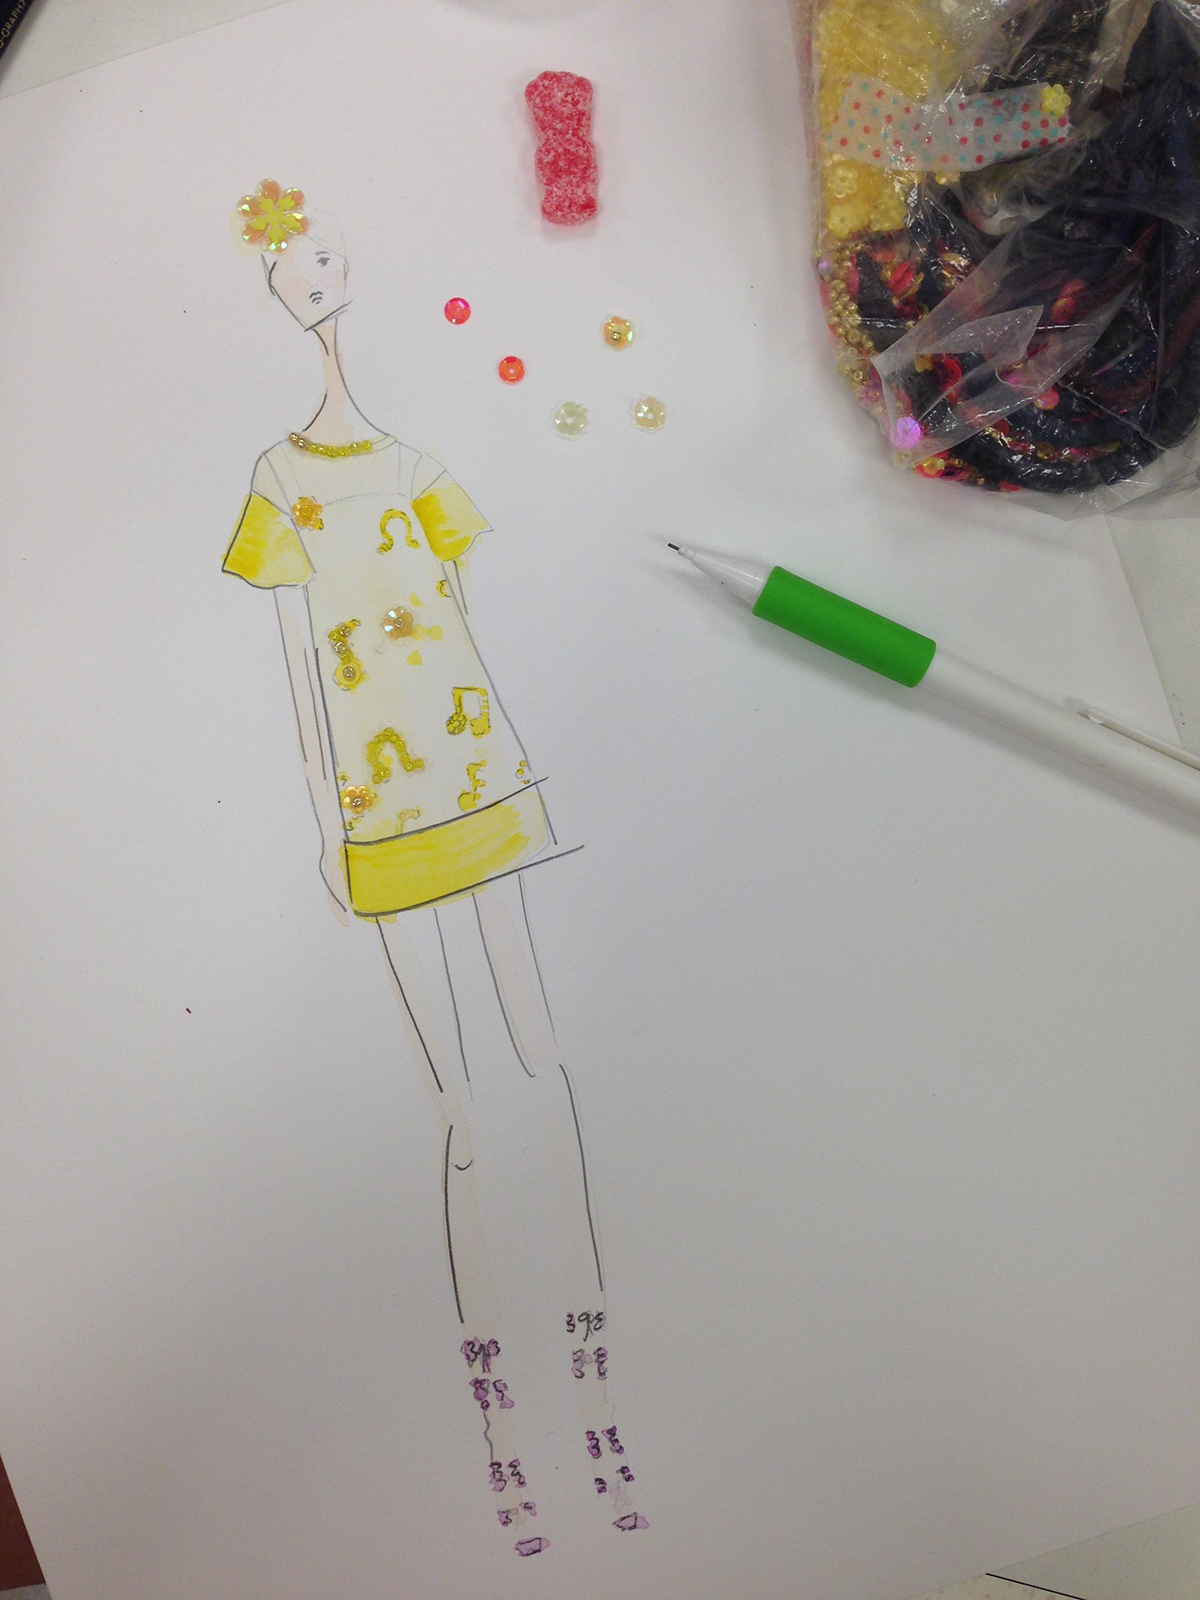 fashion design beading dolly parton decorative surfaces  yellow girly Fun clouds aaron bernstein sequins